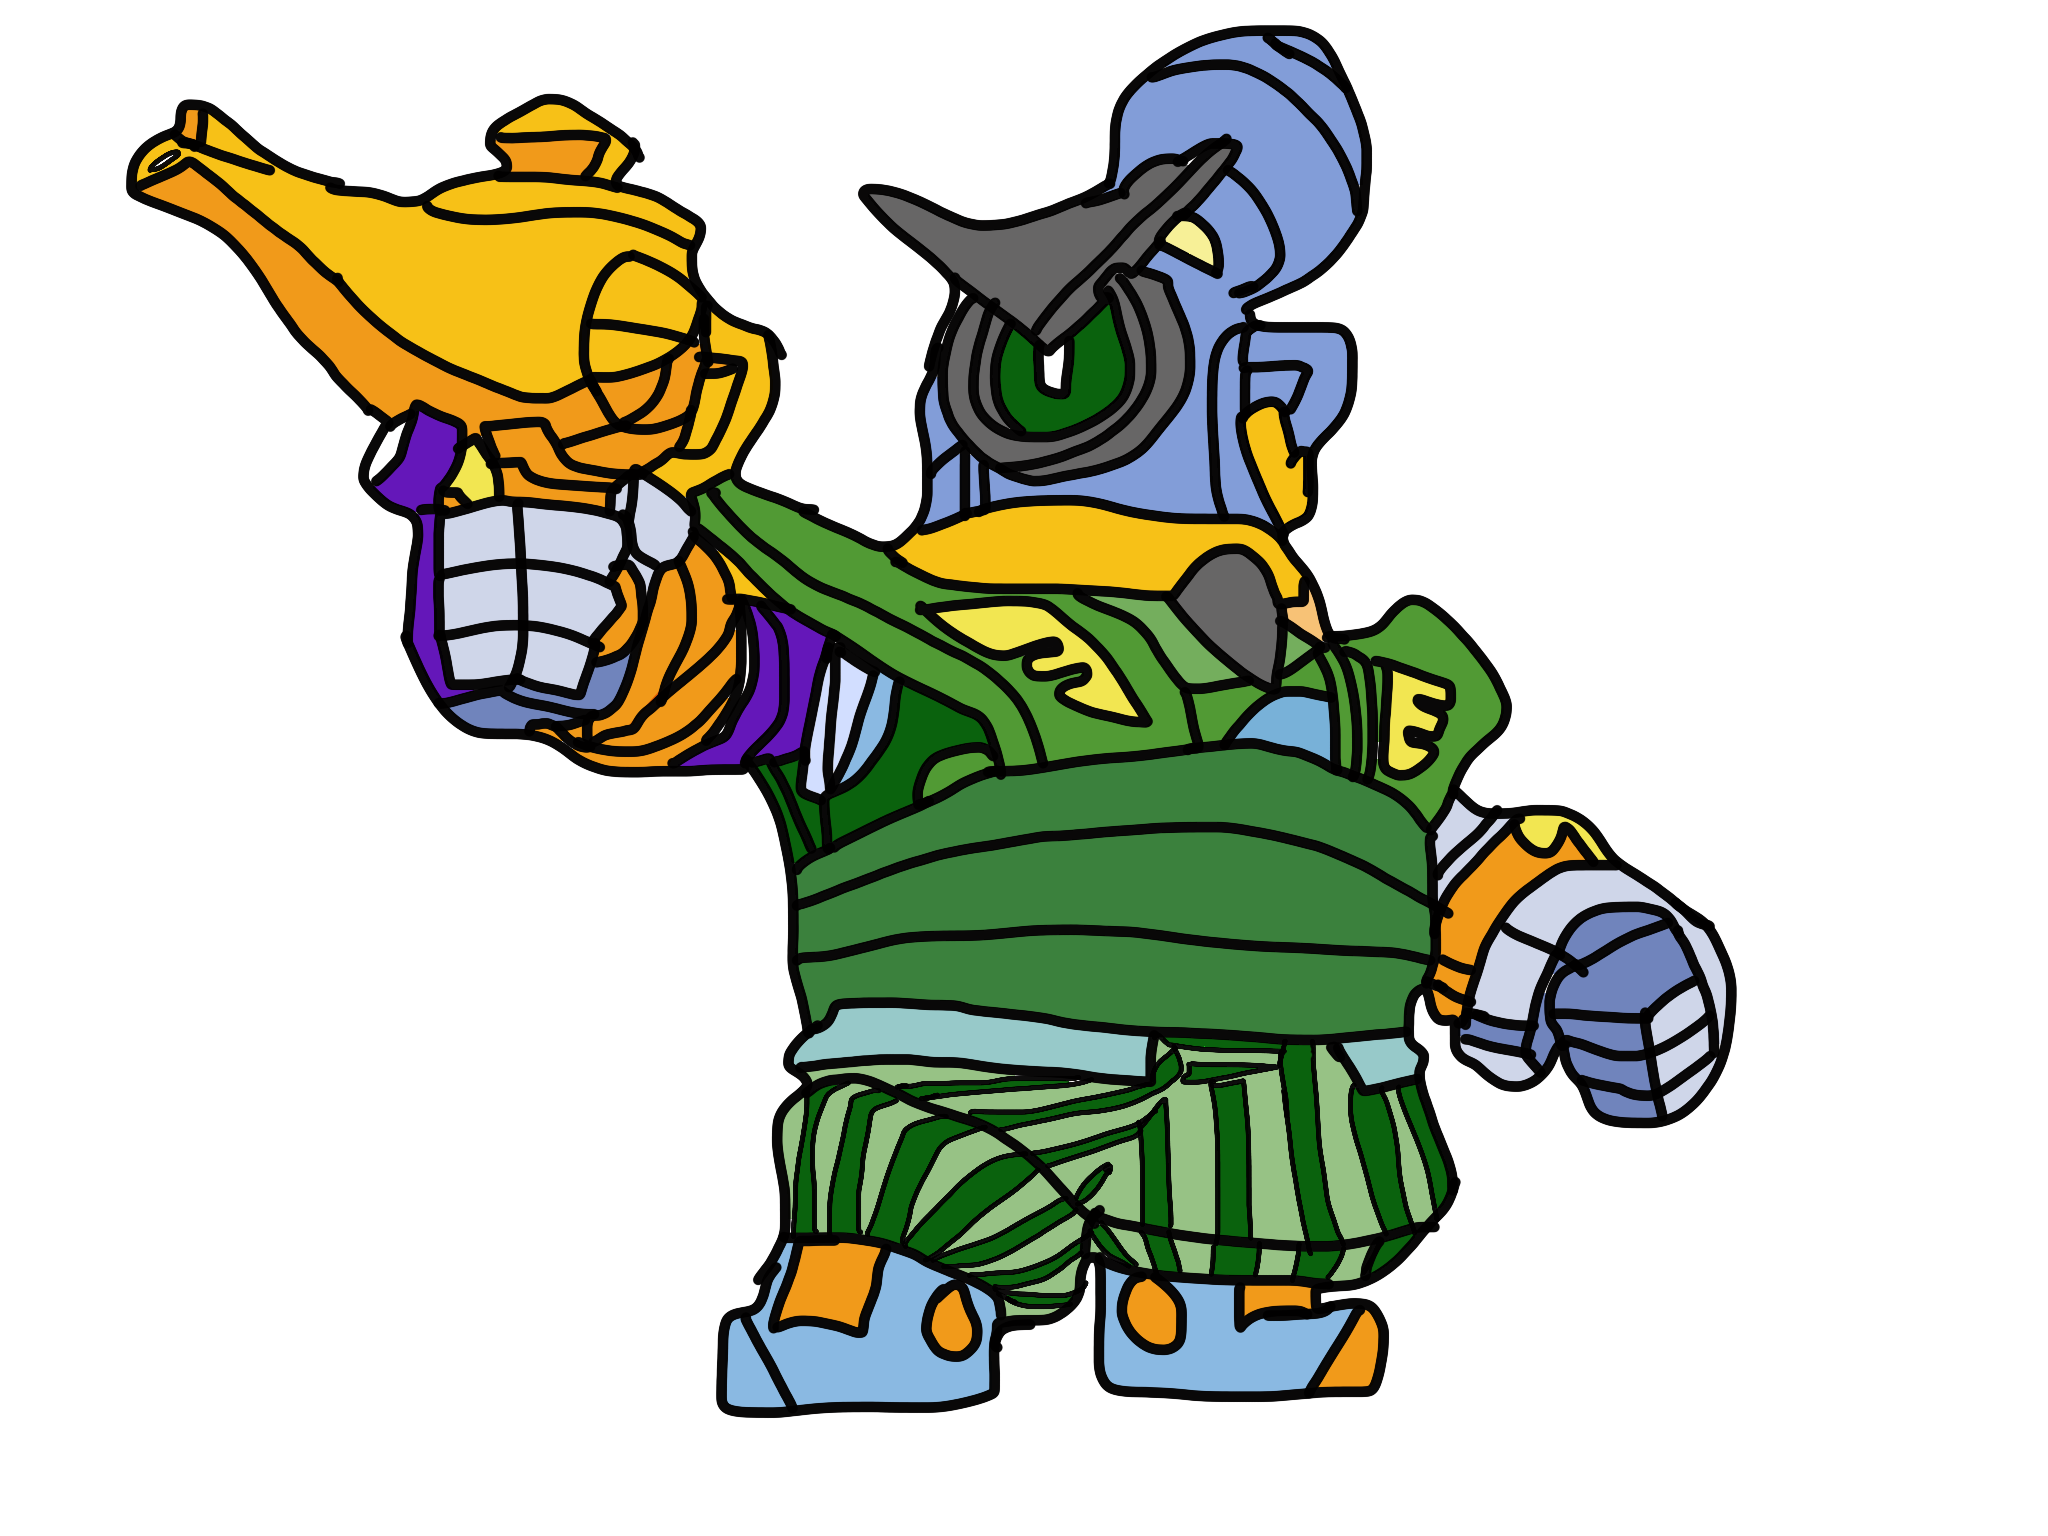 Finally Finished Coloring Guard Rico Fandom - images to color rico brawl stars